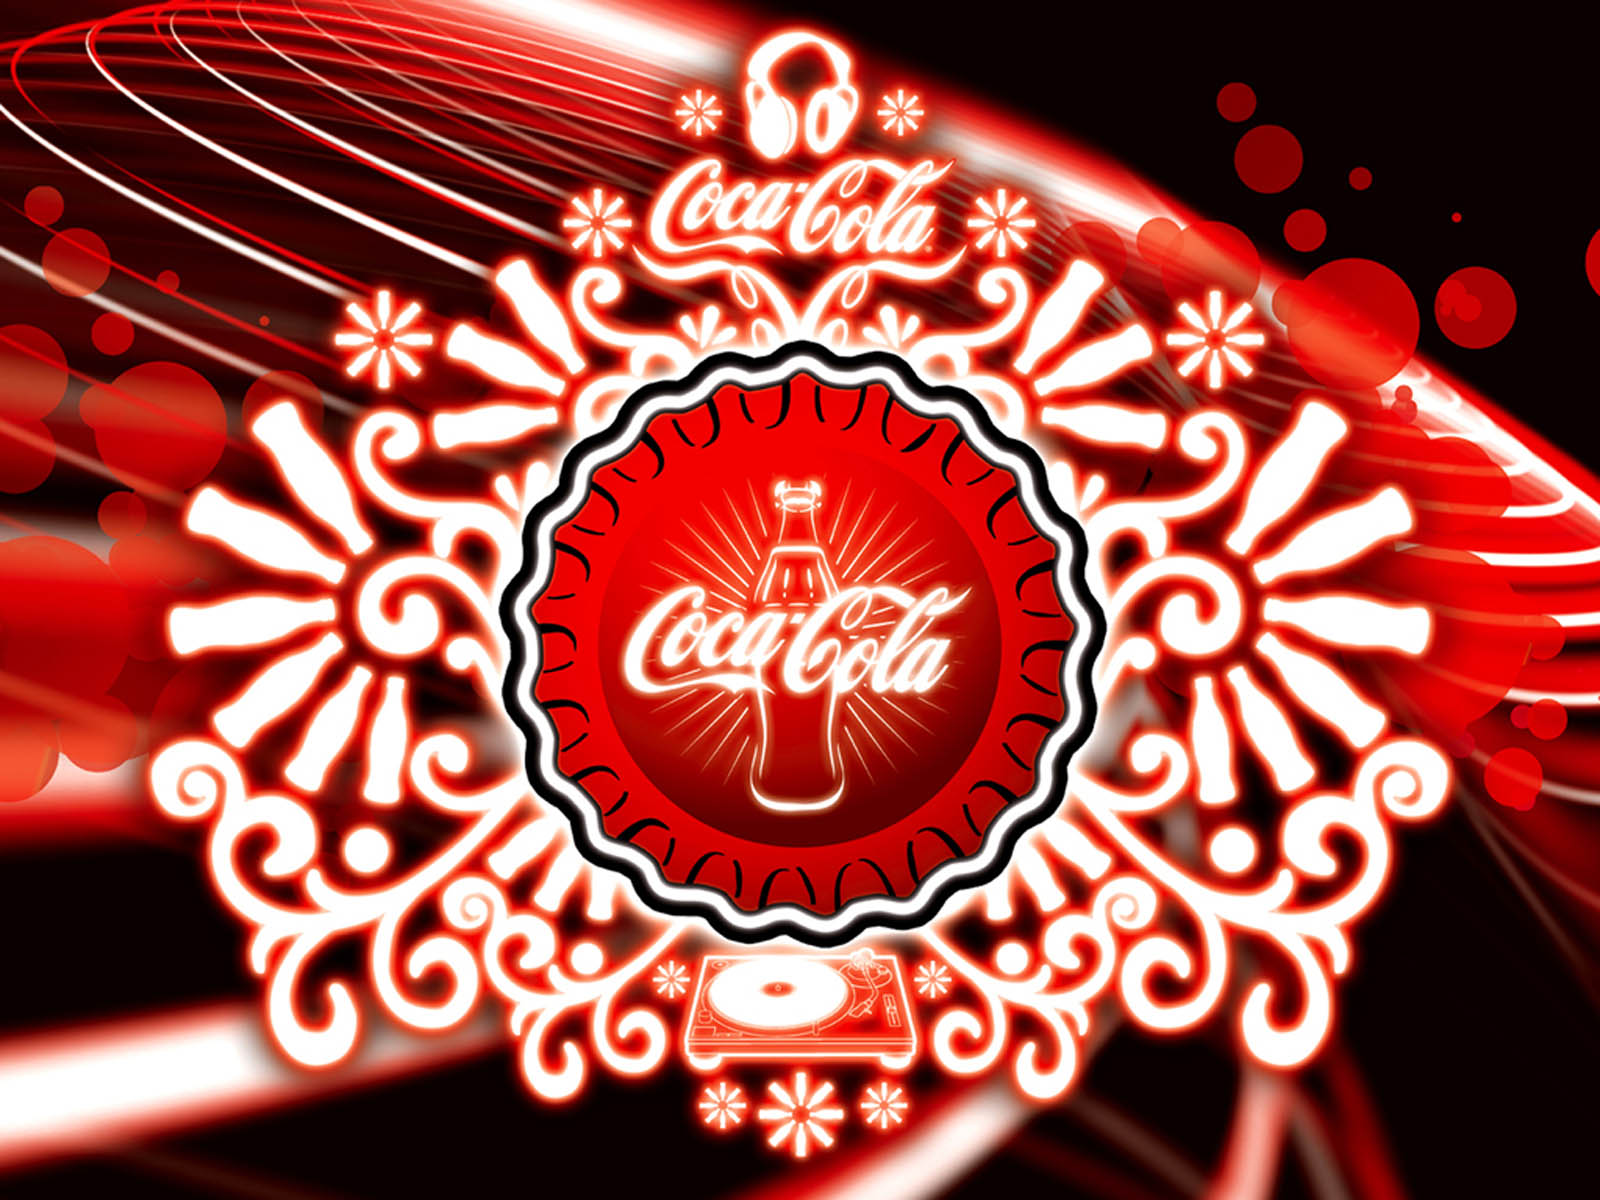 Tag Coca Cola Wallpaper Background Photos Image And Pictures For